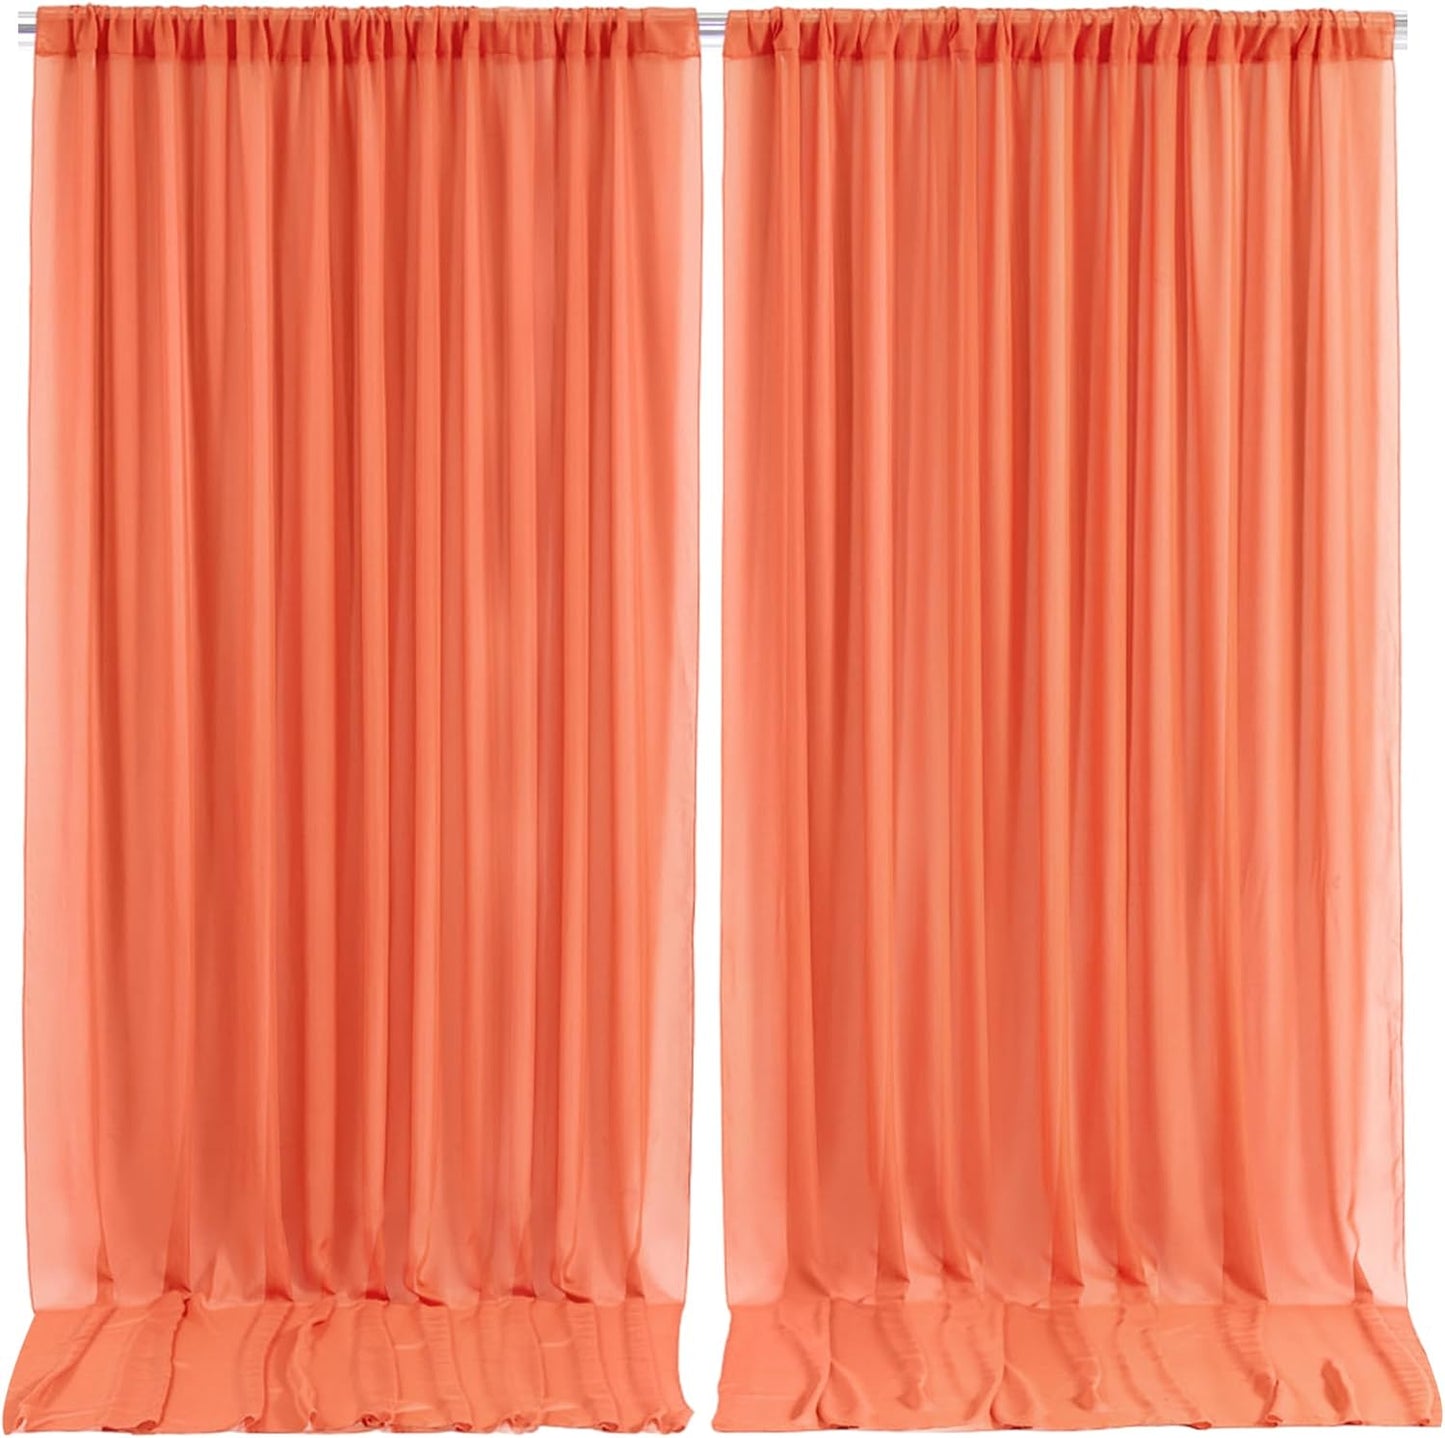 10Ft X 10Ft White Chiffon Backdrop Curtains, Wrinkle-Free Sheer Chiffon Fabric Curtain Drapes for Wedding Ceremony Arch Party Stage Decoration  Wish Care Orange  